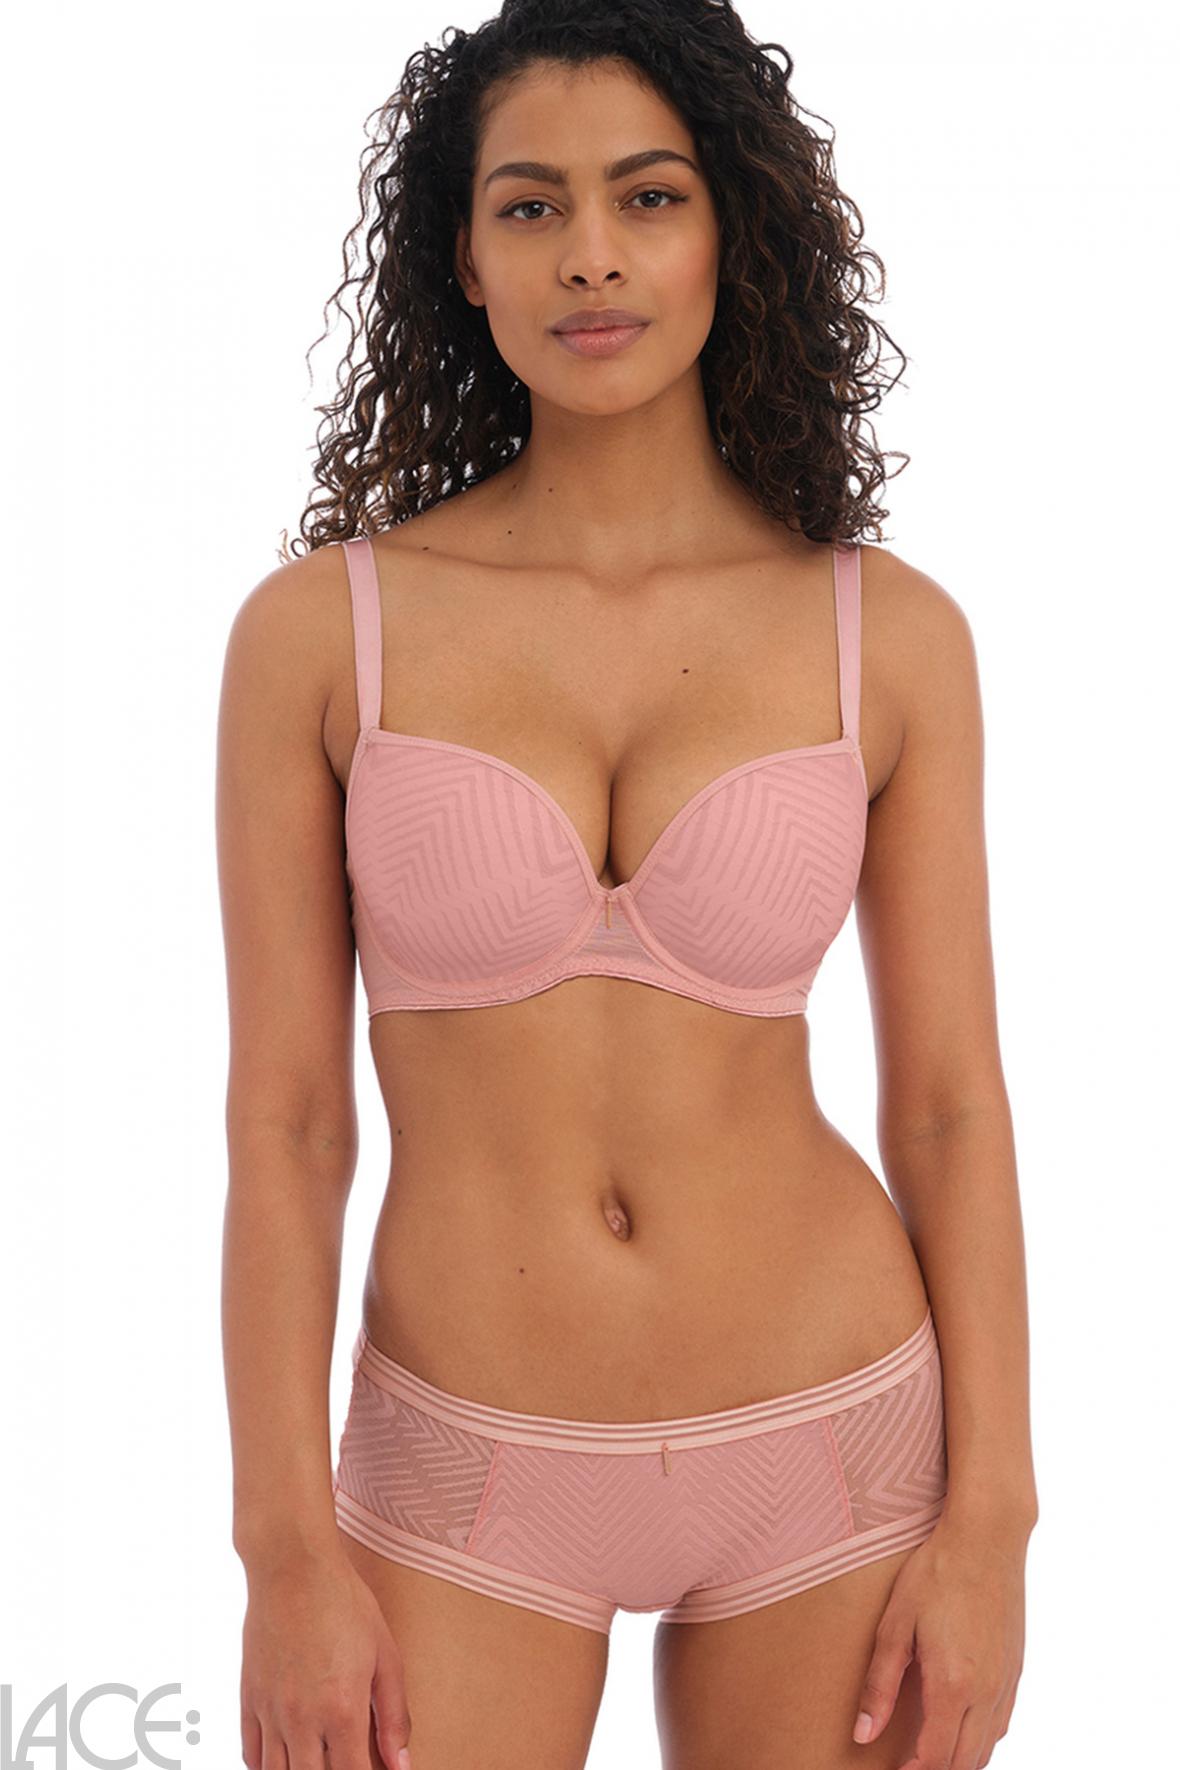 GAIA Padded Underwired Embroidered Bra Size 32 - 36 Cup B - F Rose Pinks  206